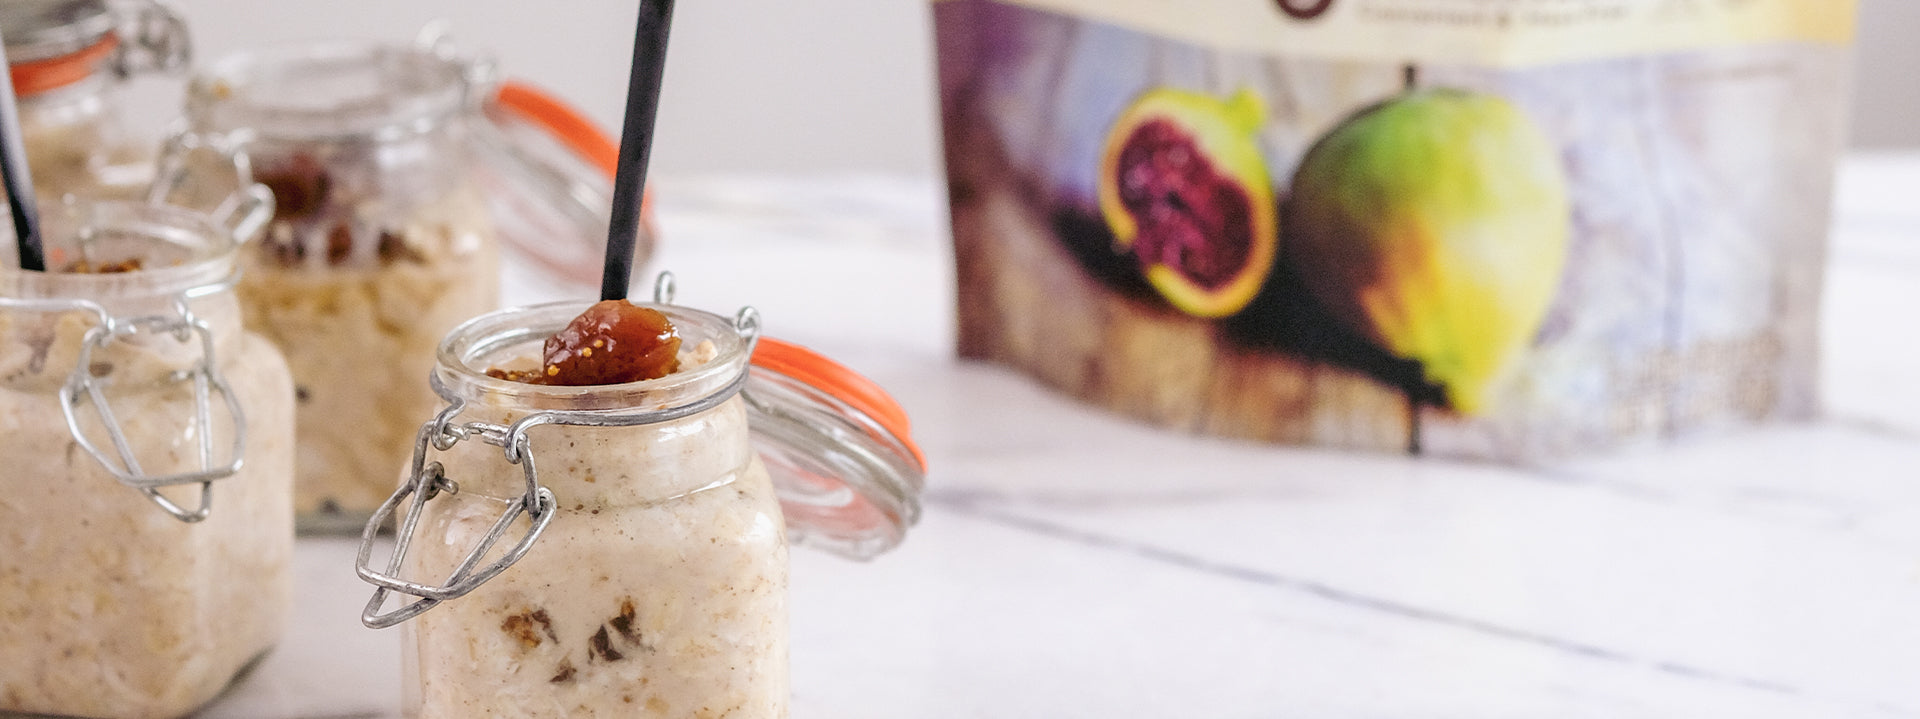 OVERNIGHT OATS WITH DRIED FIGS